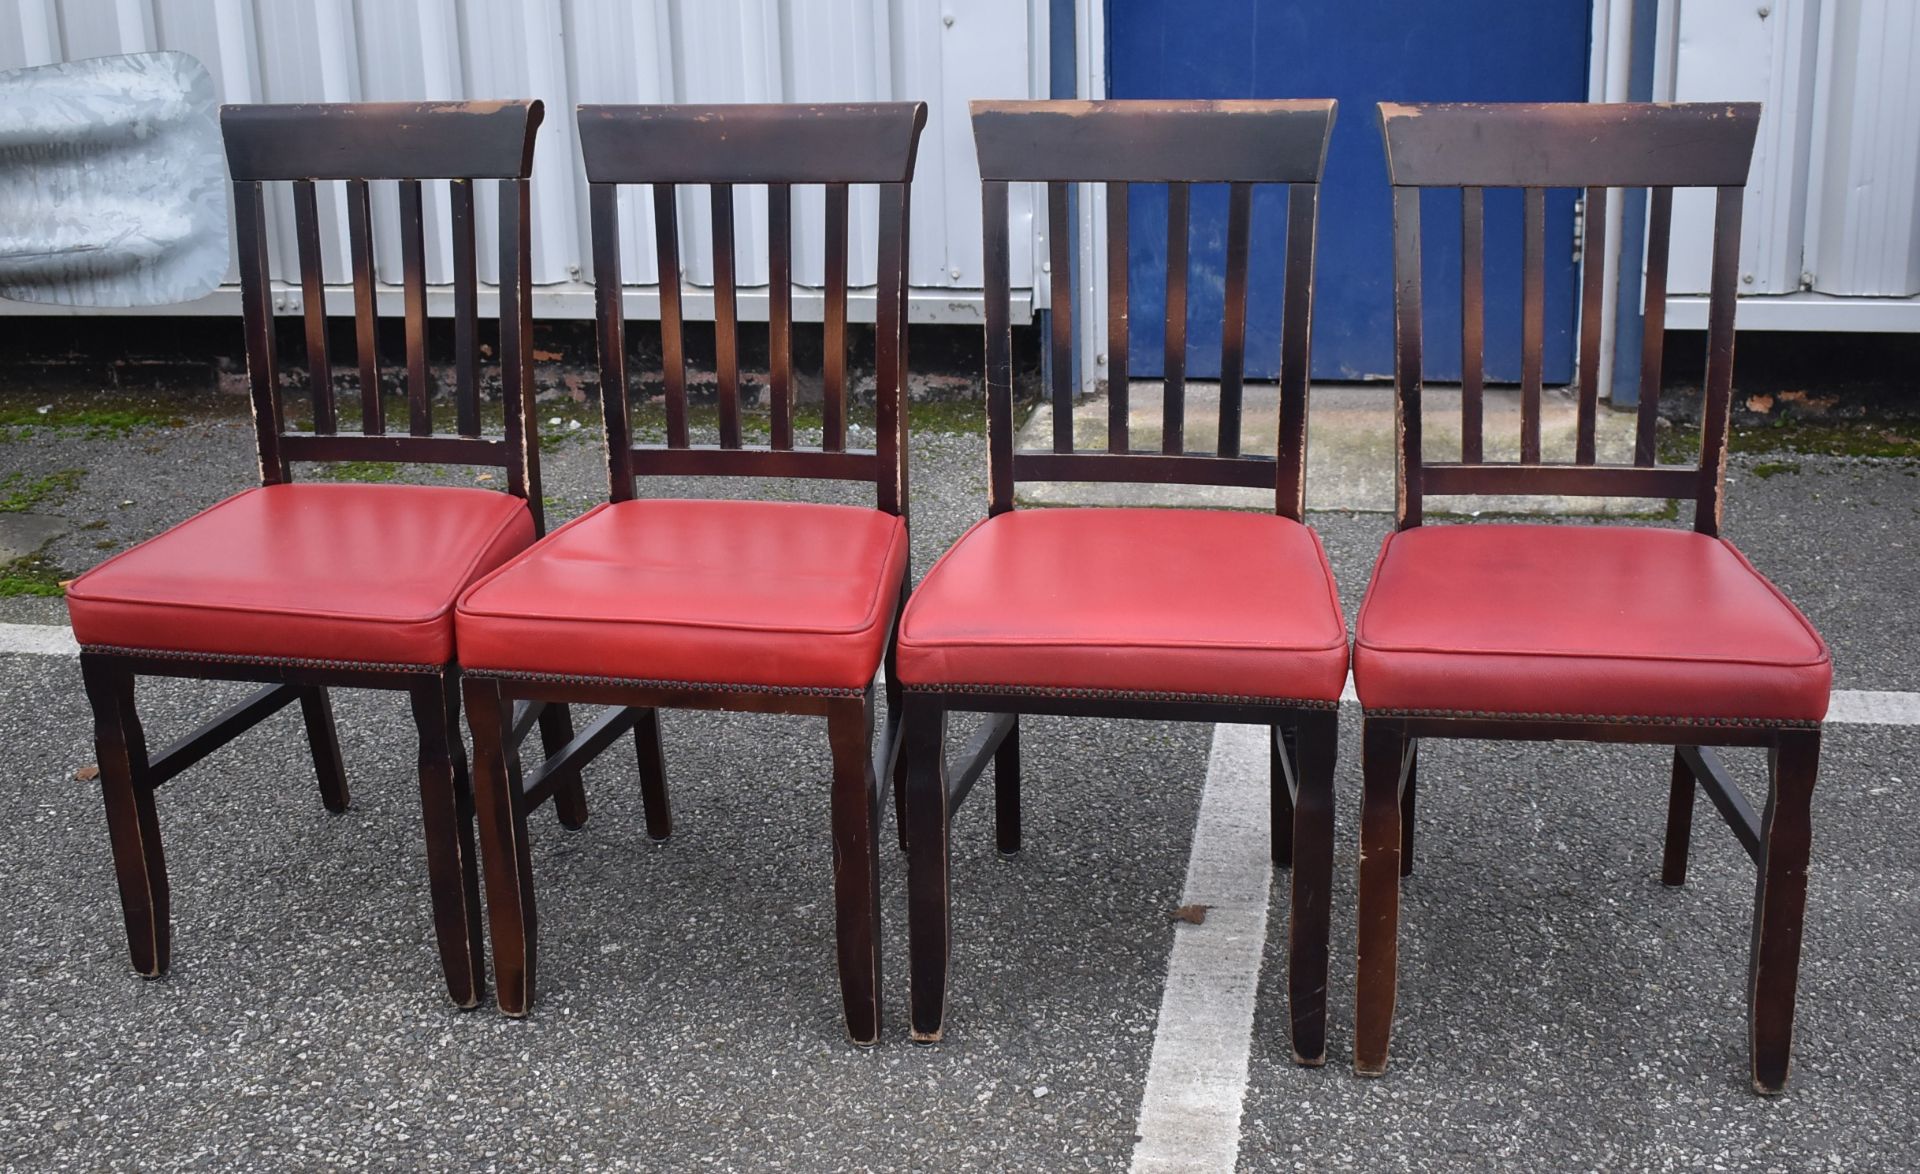 8 x Restaurant Dining Chairs With Dark Stained Wood Finish and Red Leather Seat Pads - Image 4 of 5